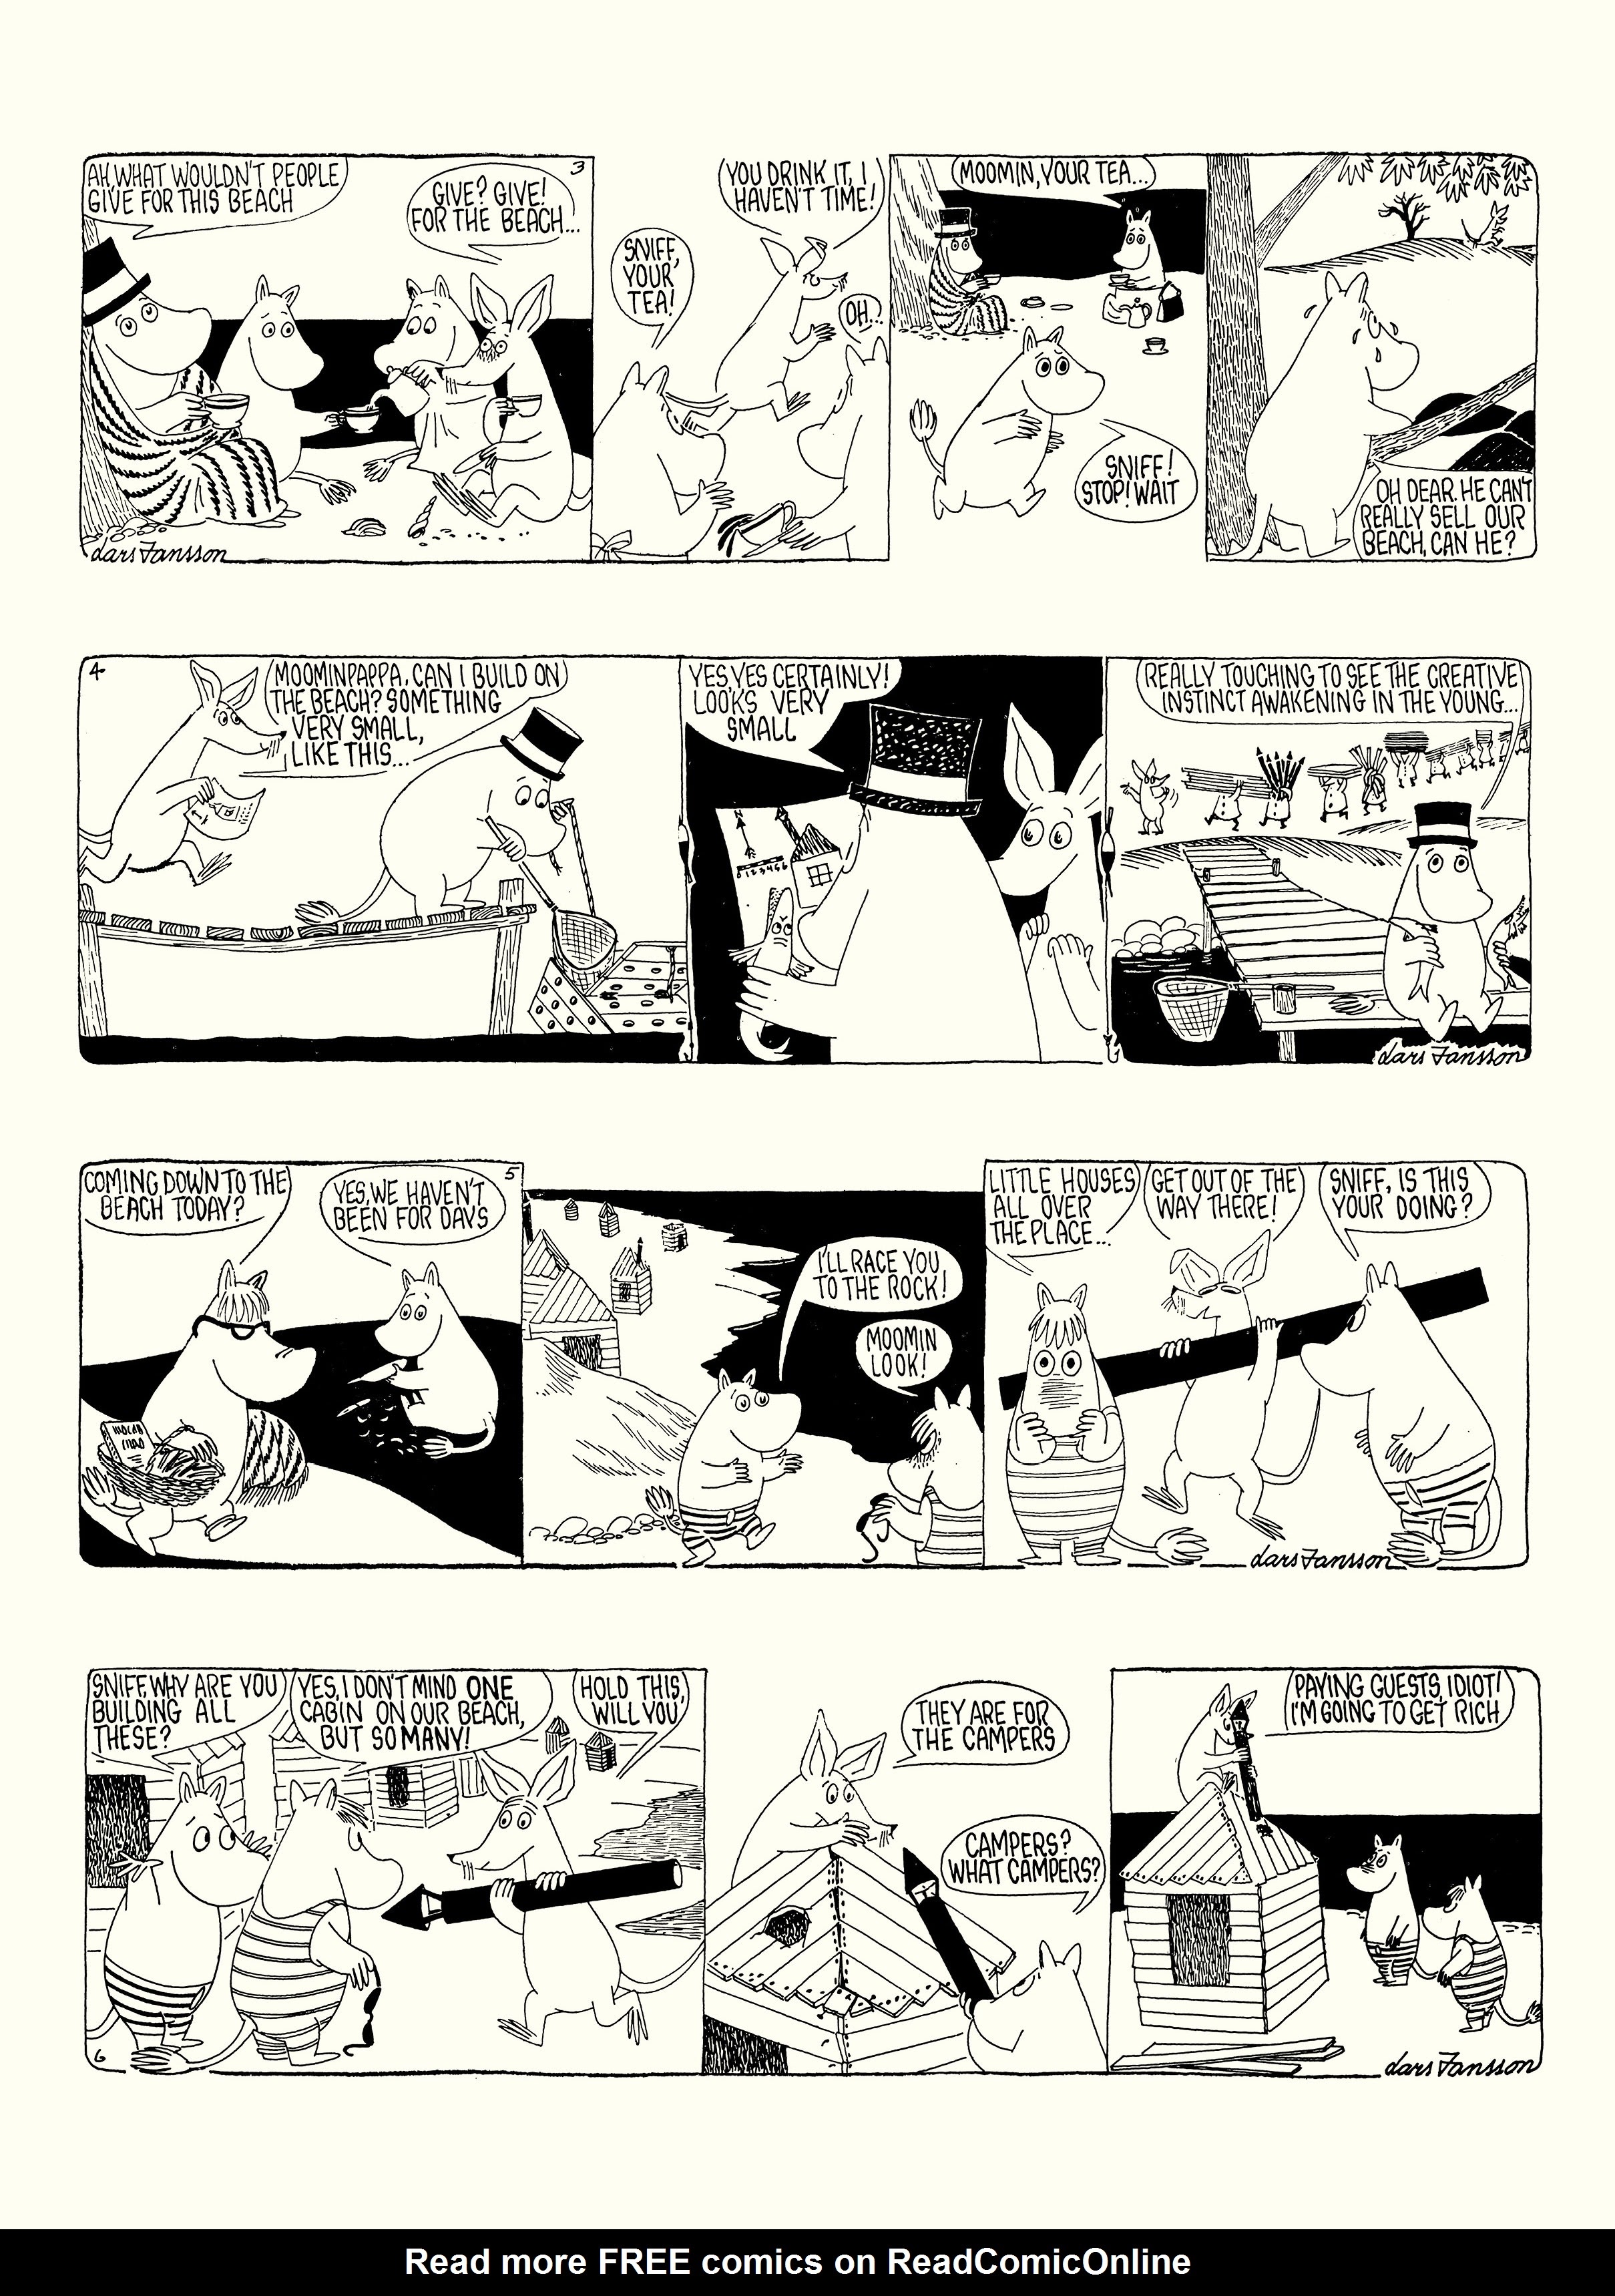 Read online Moomin: The Complete Lars Jansson Comic Strip comic -  Issue # TPB 8 - 52